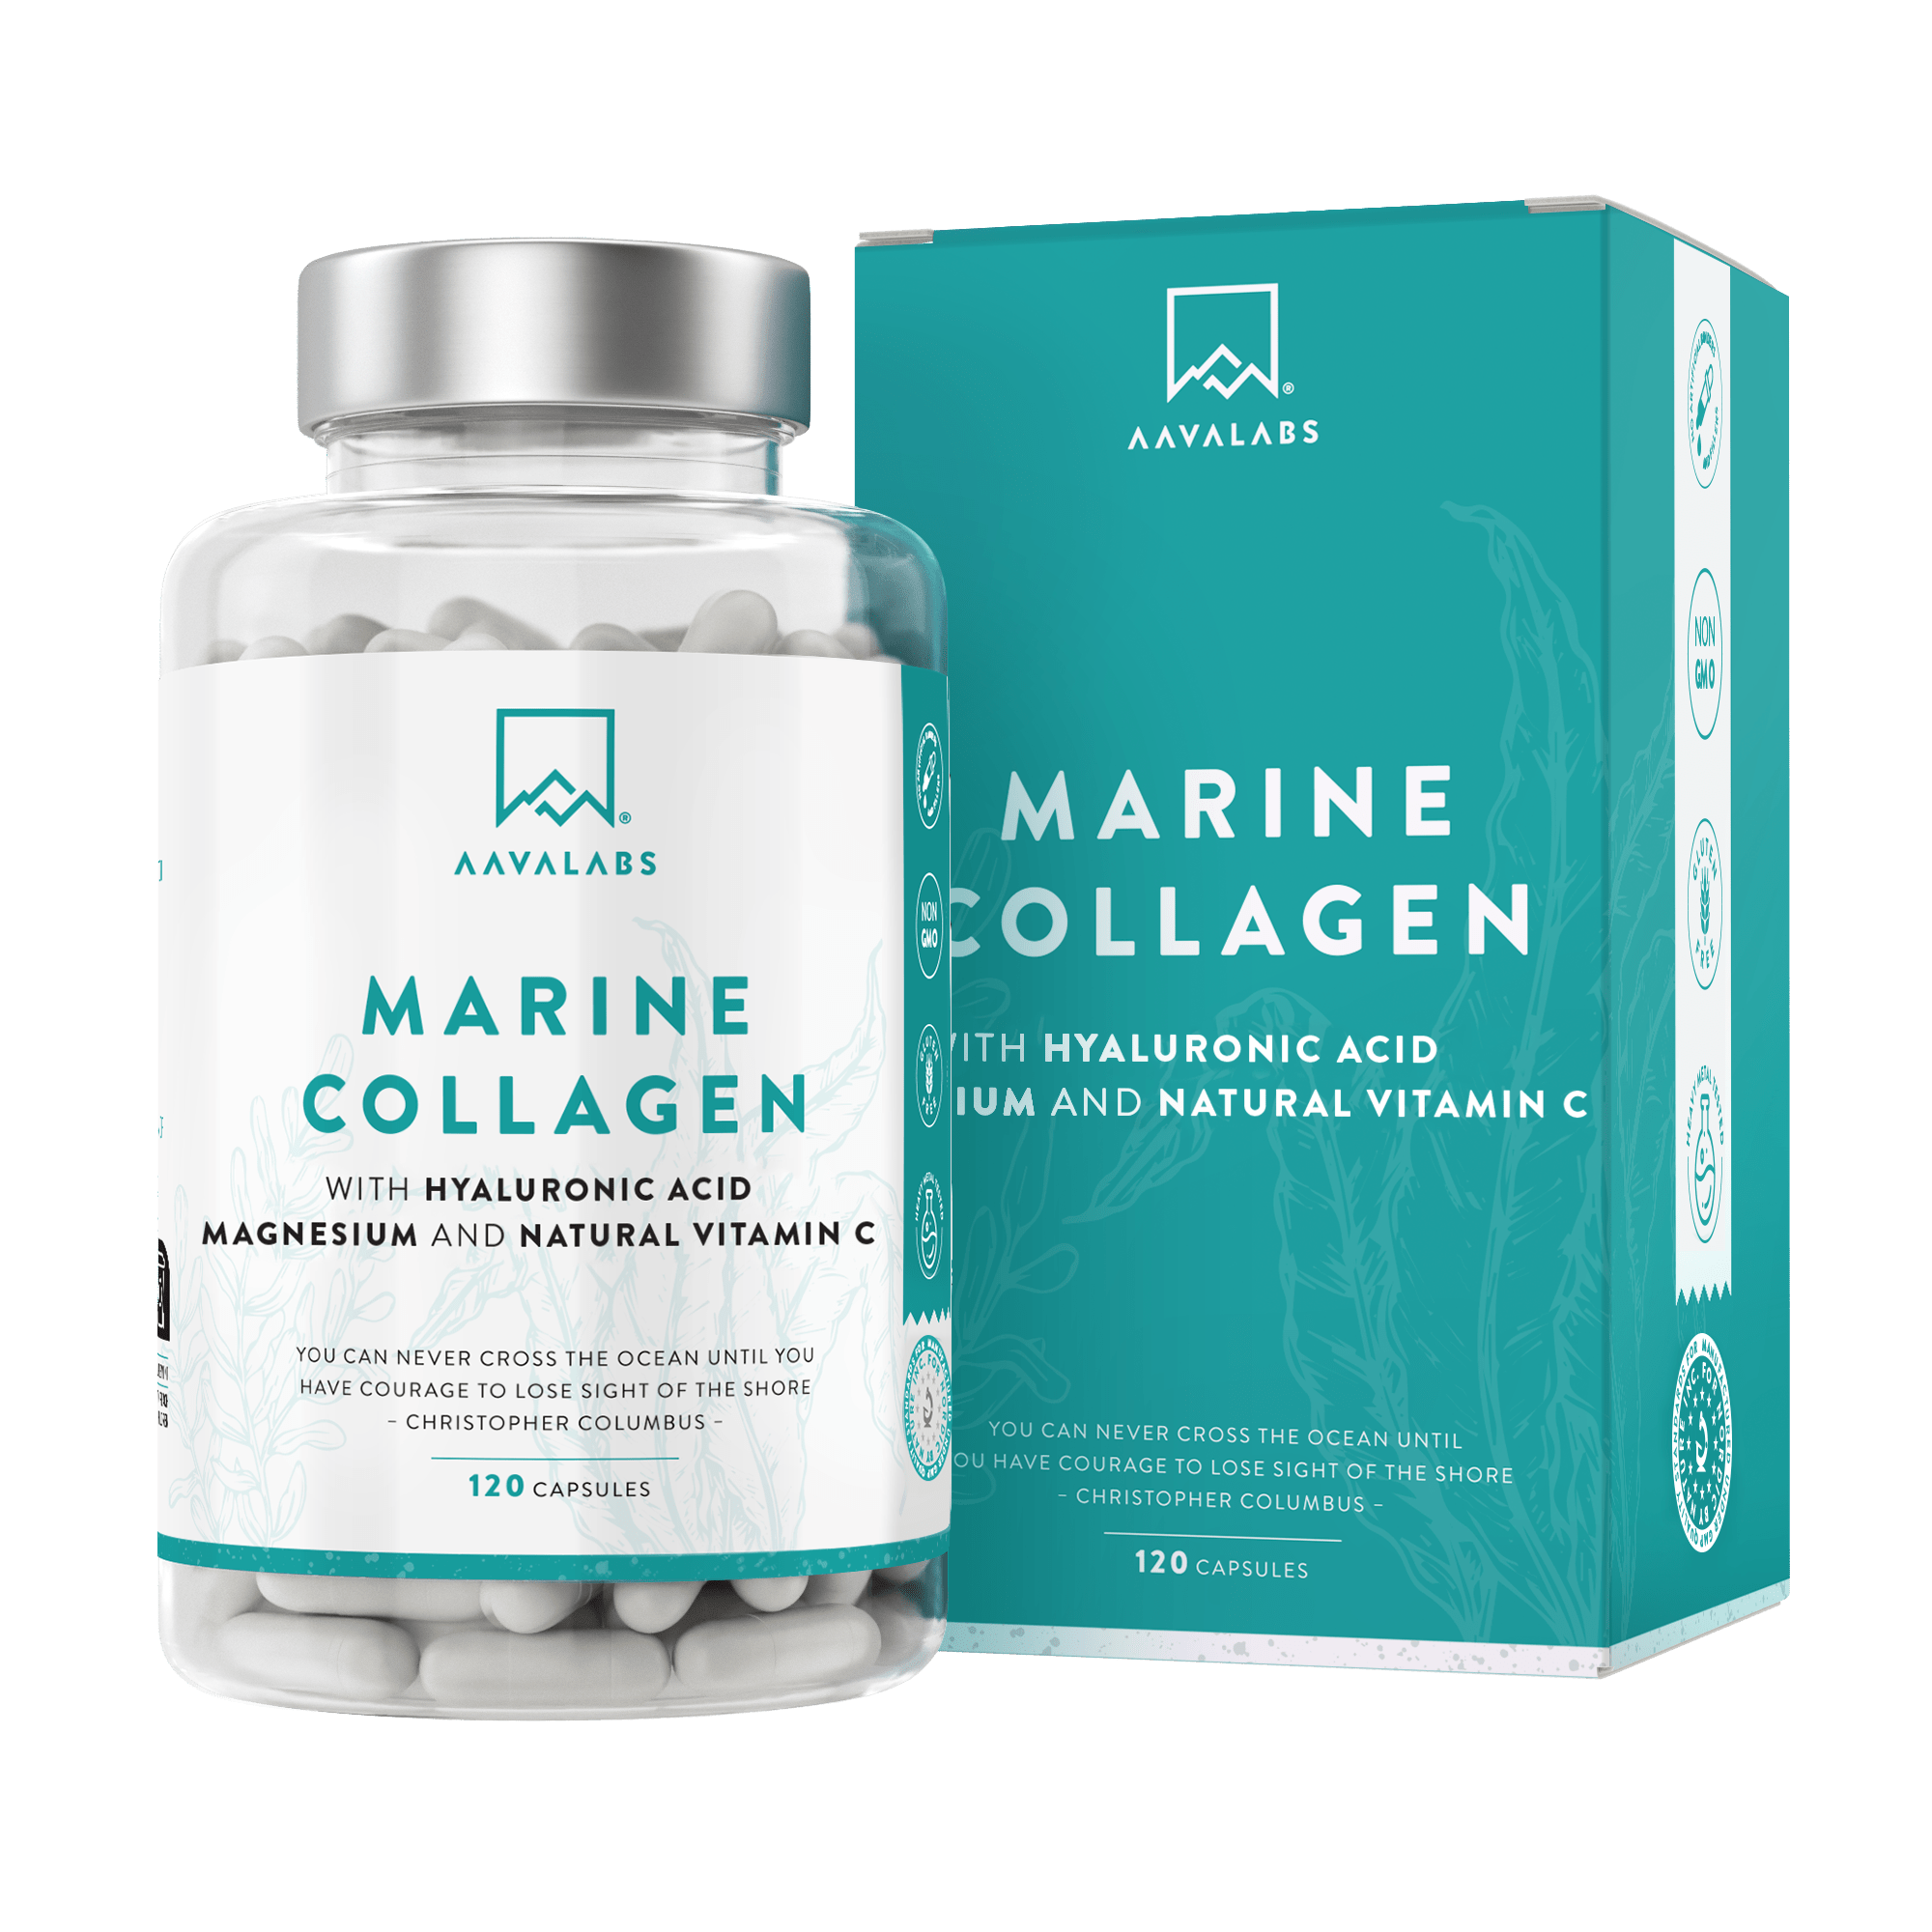 AAVALABS Marine Collagen bottle and box packaging